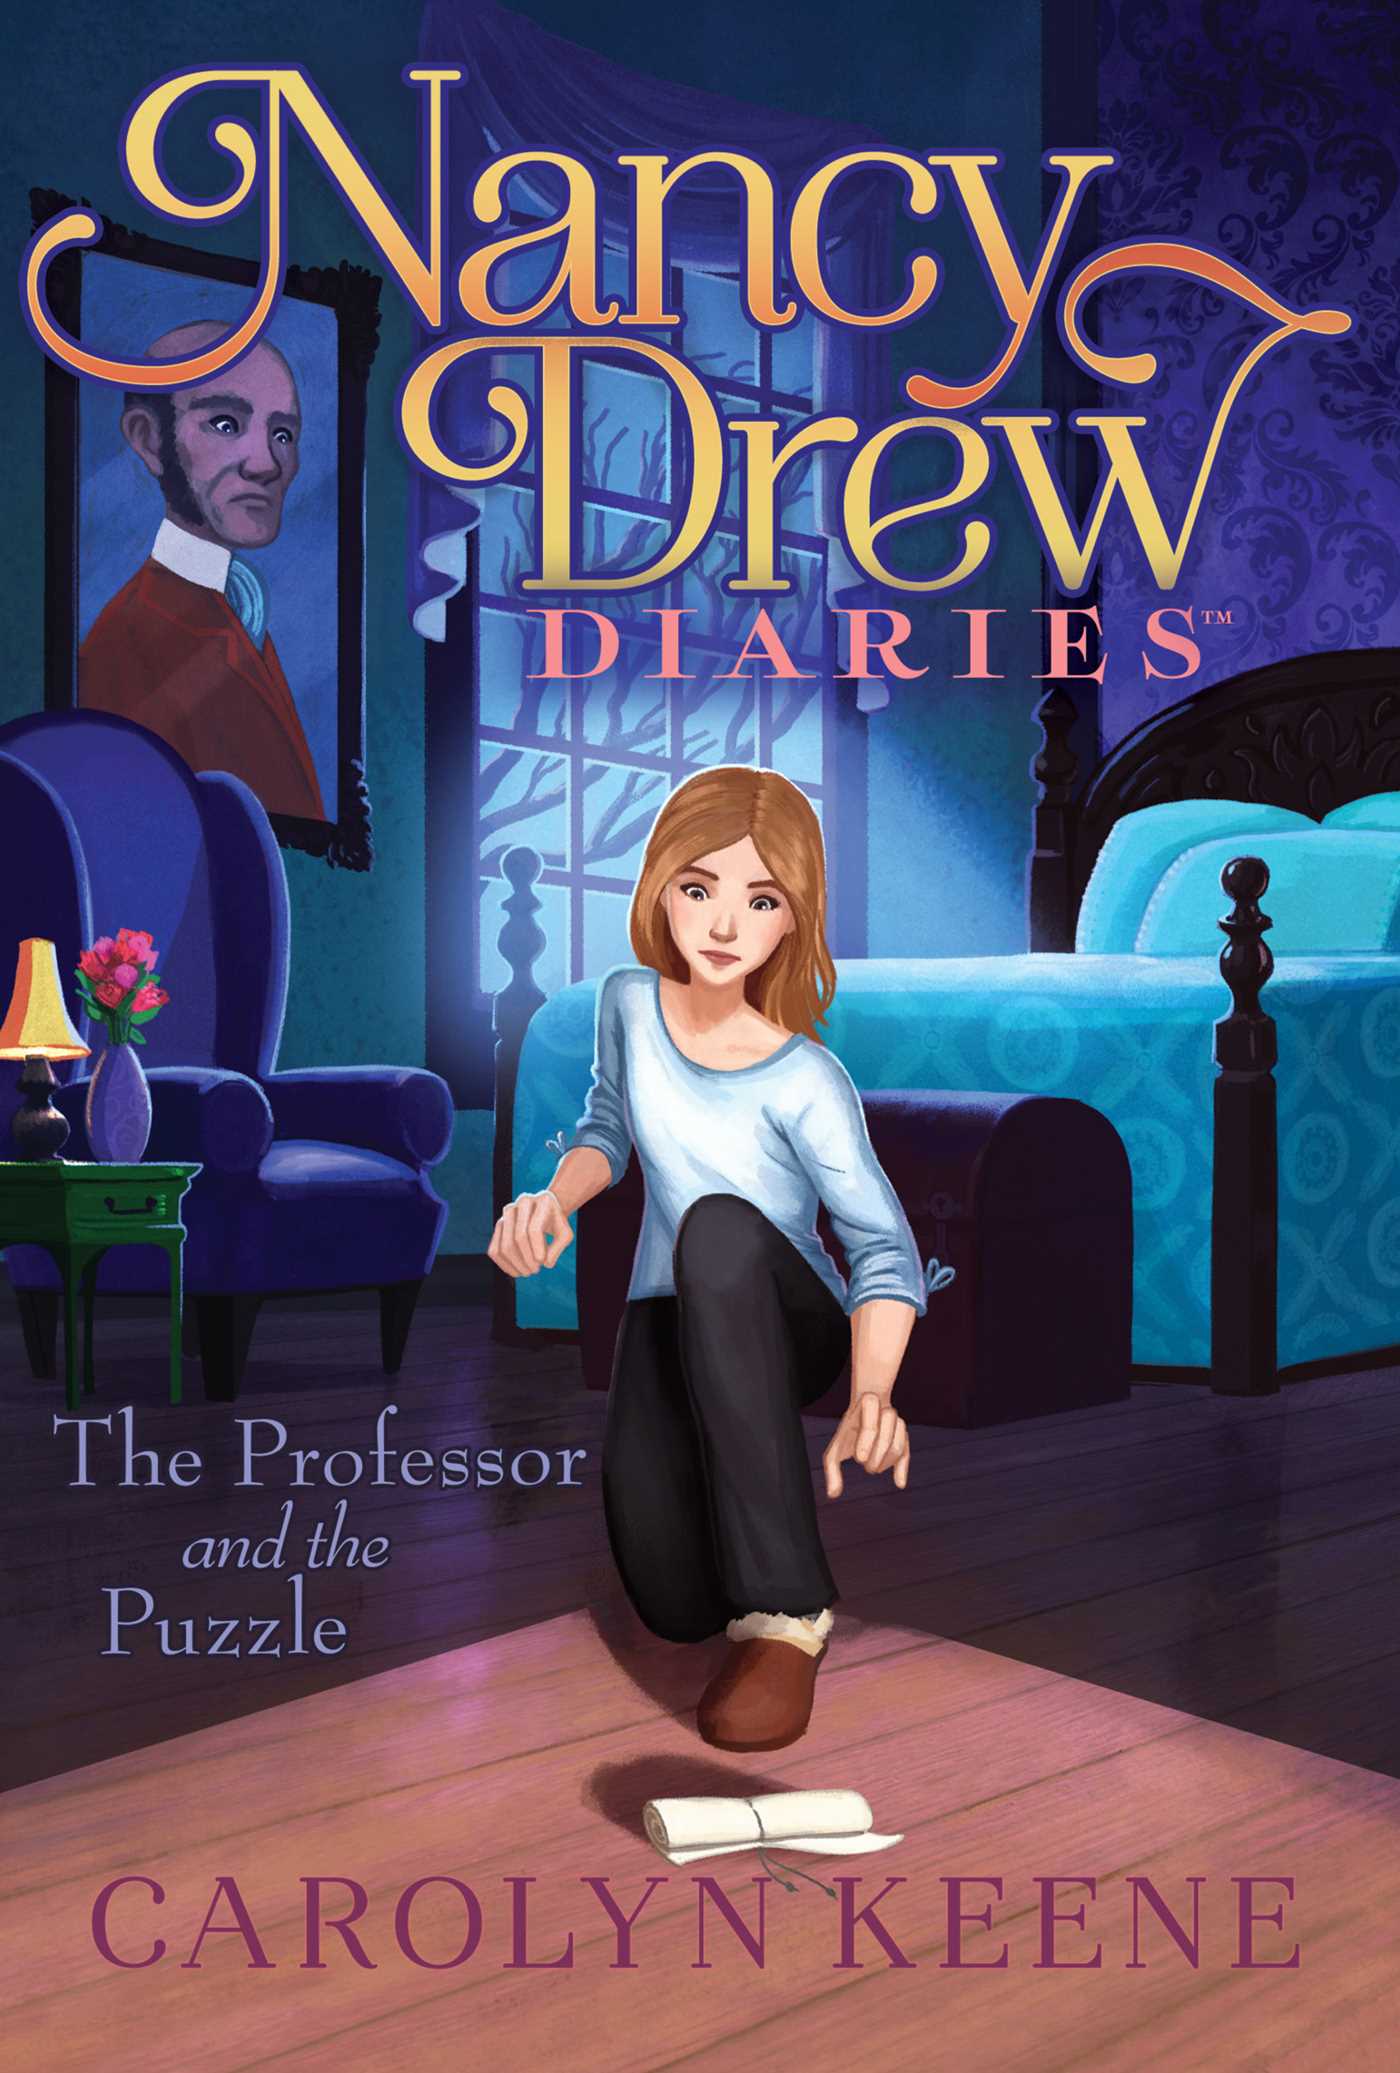 The professor and the puzzle